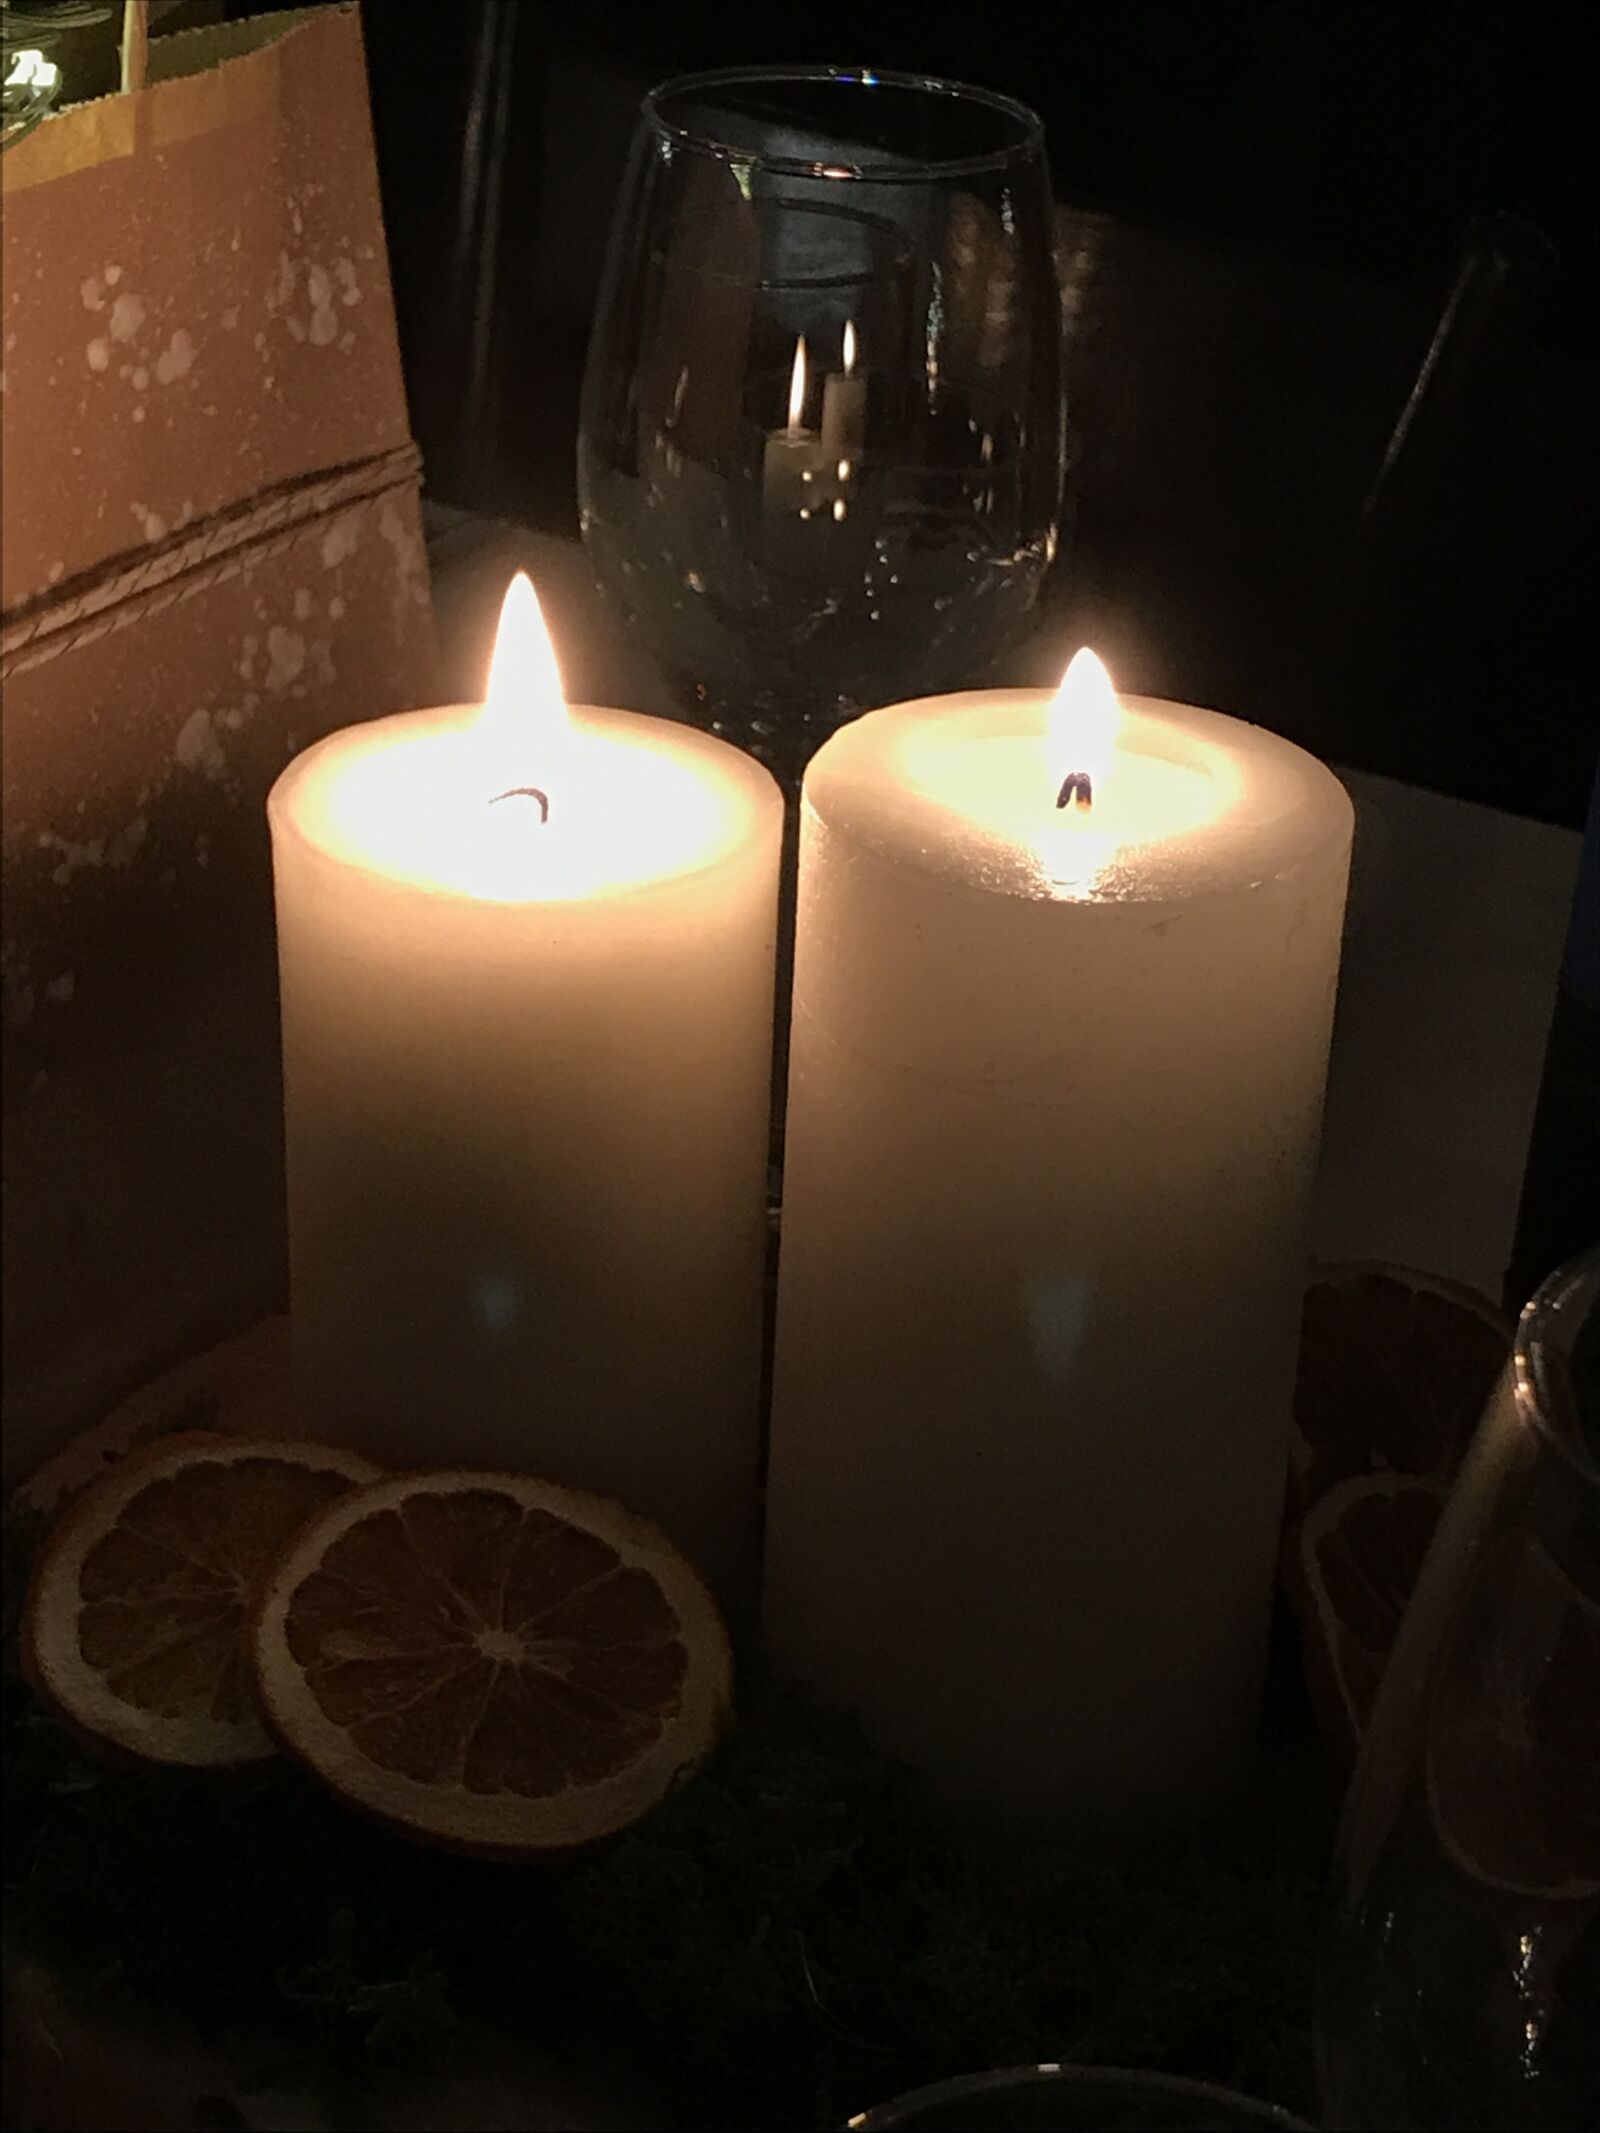 Apple iPhone 7 + iPhone 7 back camera 3.99mm f/1.8 sample photo. Candle, light, decoration photography